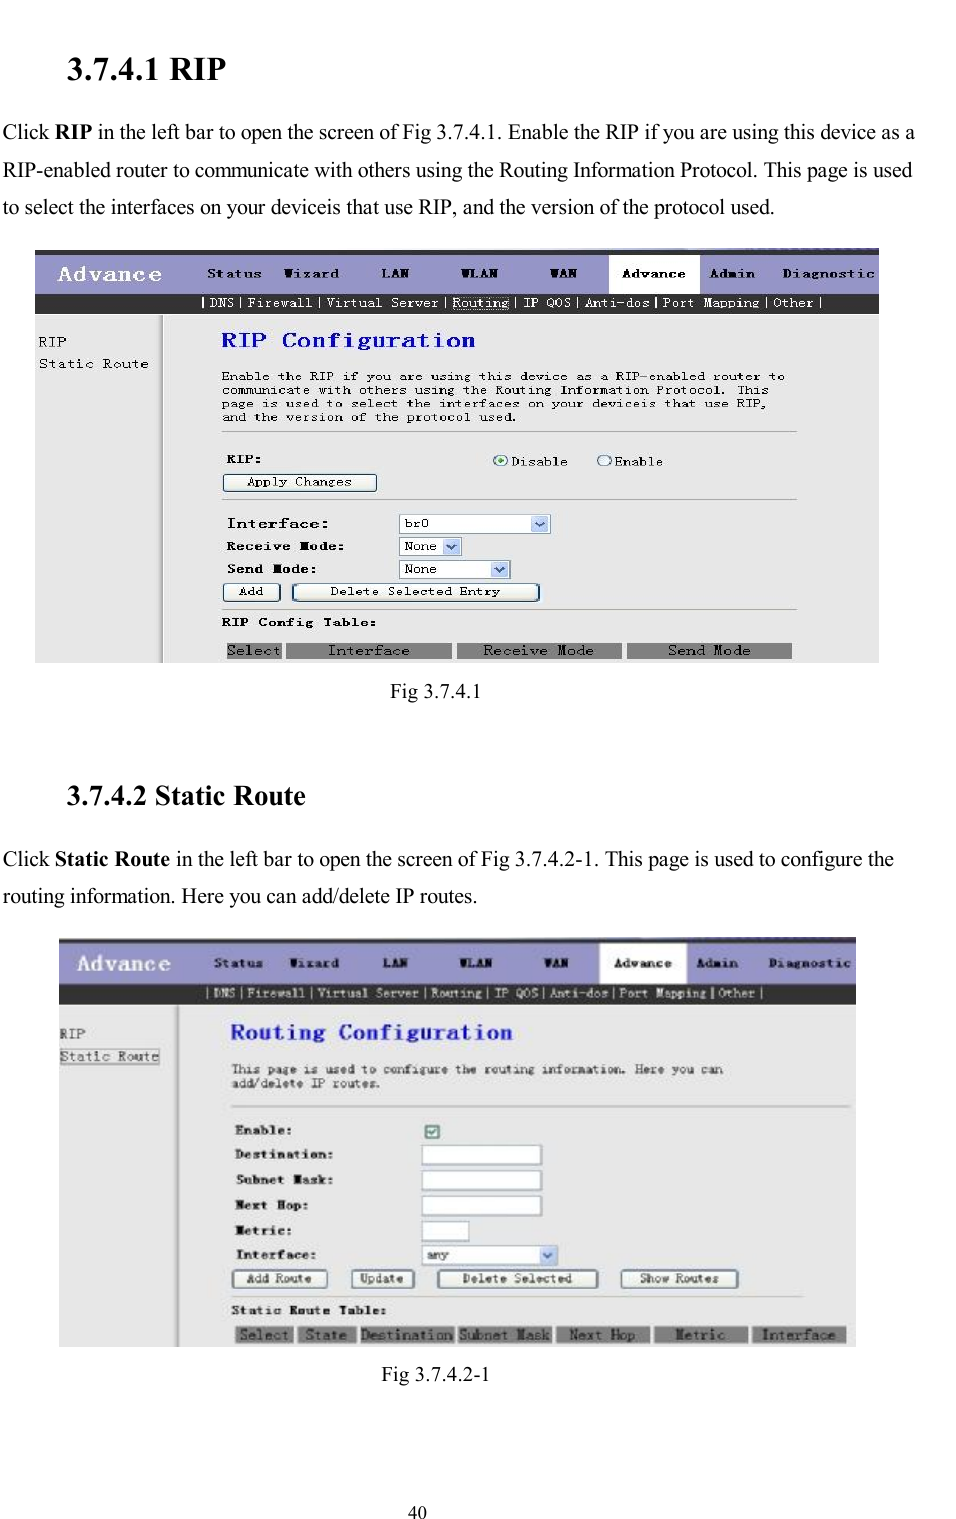                                                                     40  3.7.4.1 RIP Click RIP in the left bar to open the screen of Fig 3.7.4.1. Enable the RIP if you are using this device as a RIP-enabled router to communicate with others using the Routing Information Protocol. This page is used to select the interfaces on your deviceis that use RIP, and the version of the protocol used.  Fig 3.7.4.1   3.7.4.2 Static Route Click Static Route in the left bar to open the screen of Fig 3.7.4.2-1. This page is used to configure the routing information. Here you can add/delete IP routes.  Fig 3.7.4.2-1    